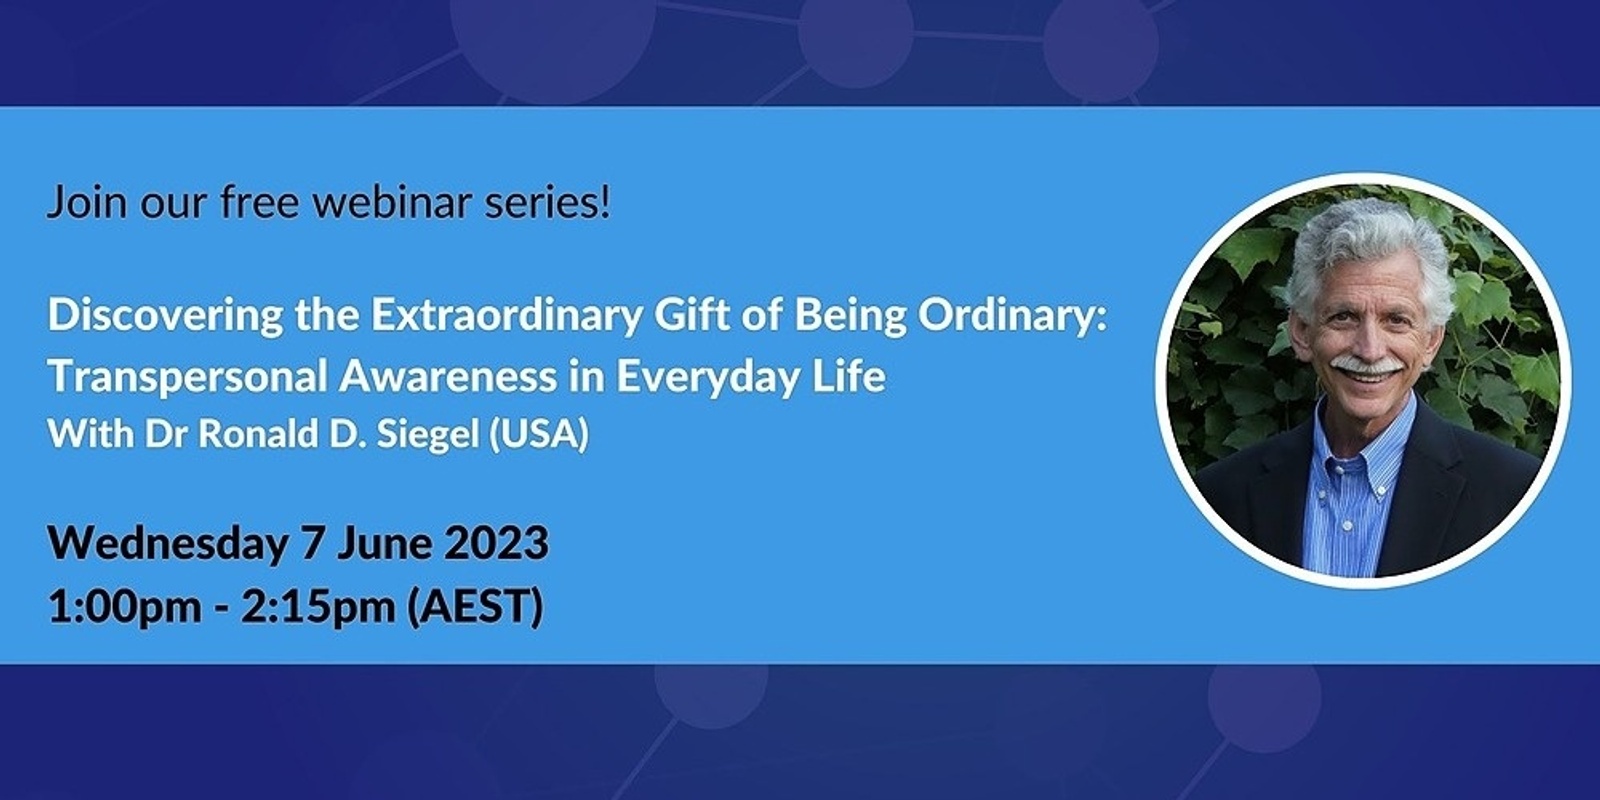 MMA FREE Webinar Series - Discovering the Extraordinary Gift of Being Ordinary: Transpersonal Awareness in Everyday Life With Dr Ronald D. Siegel (USA)